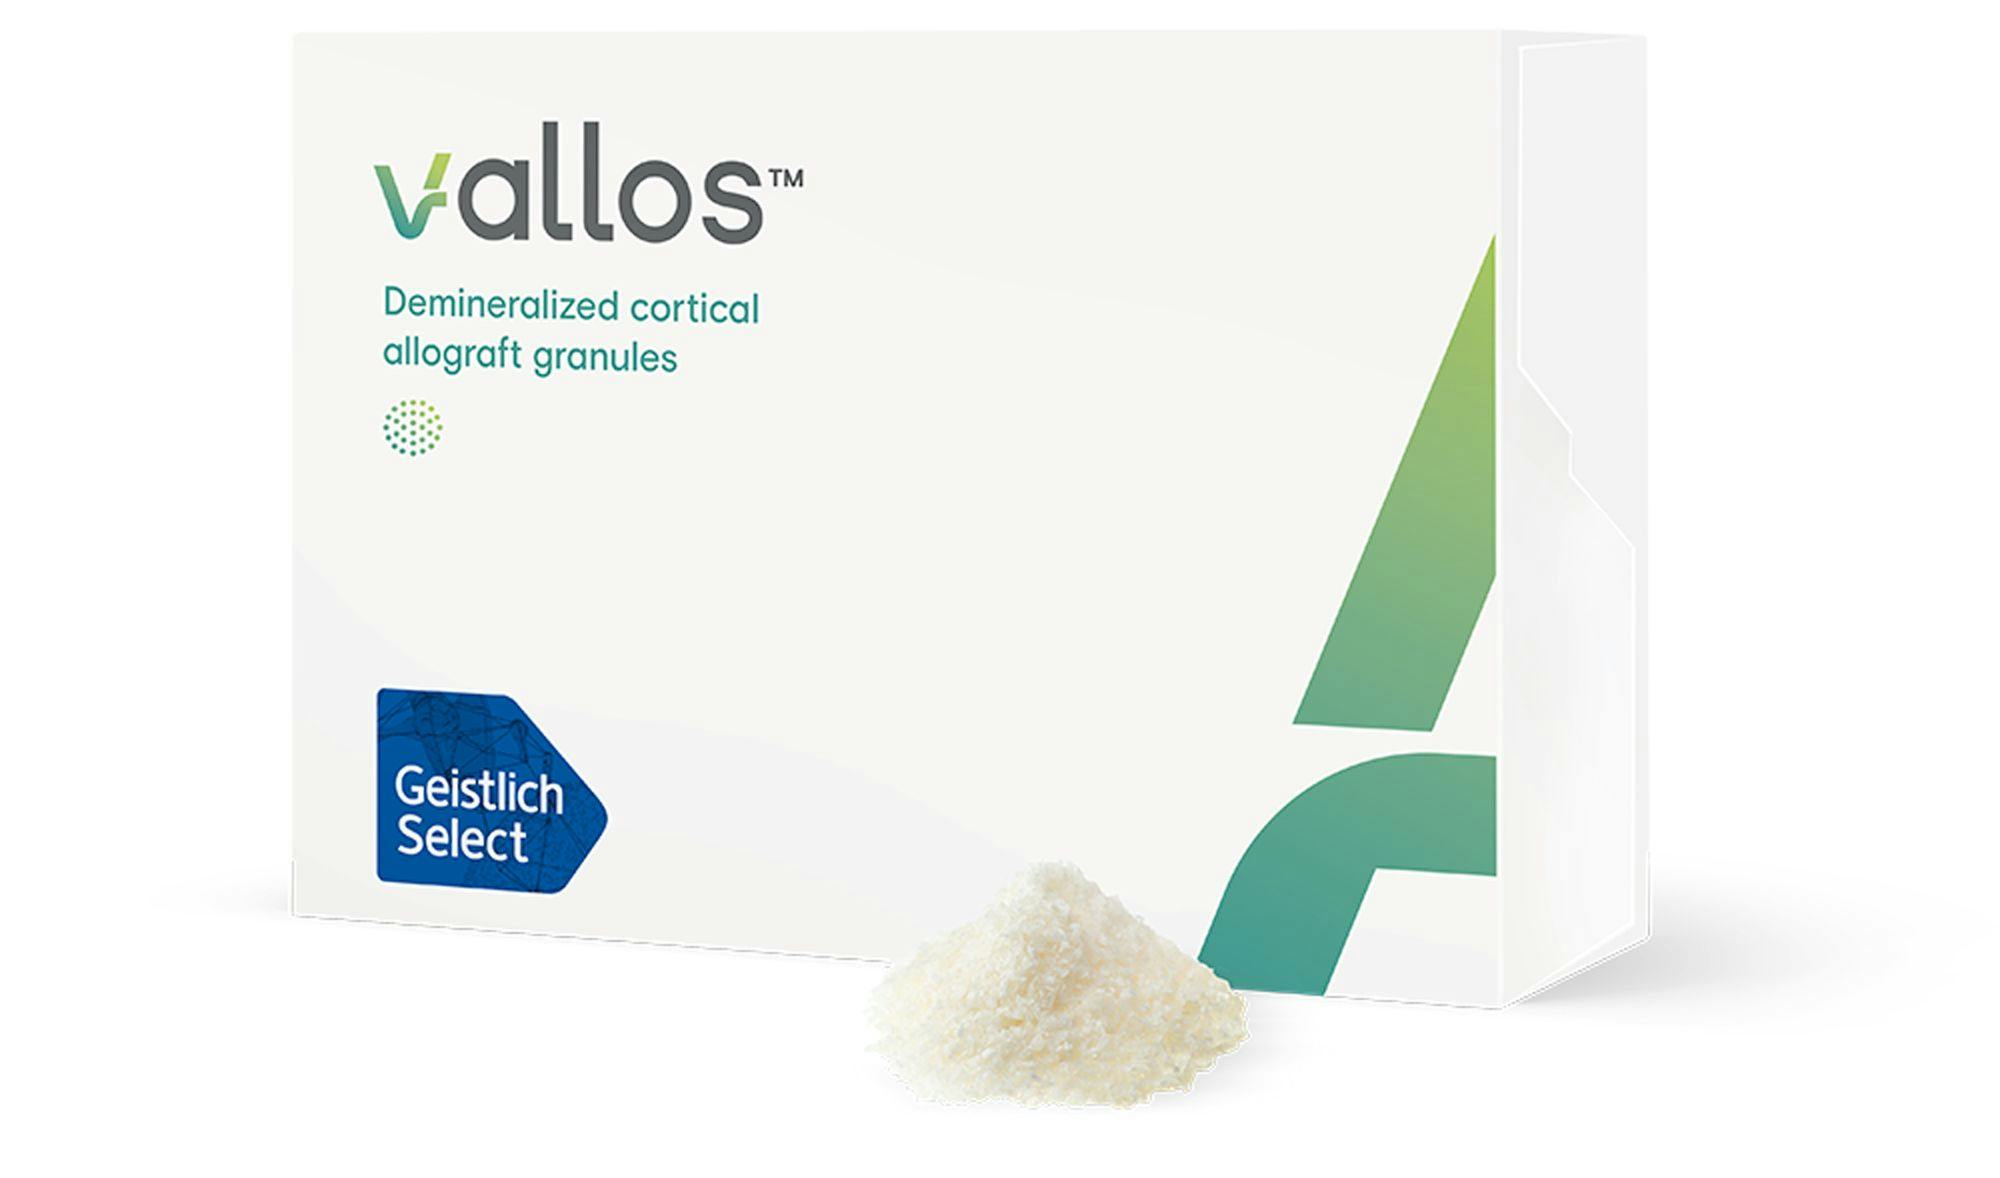 Geistlich Launches New Allograft Product Vallos